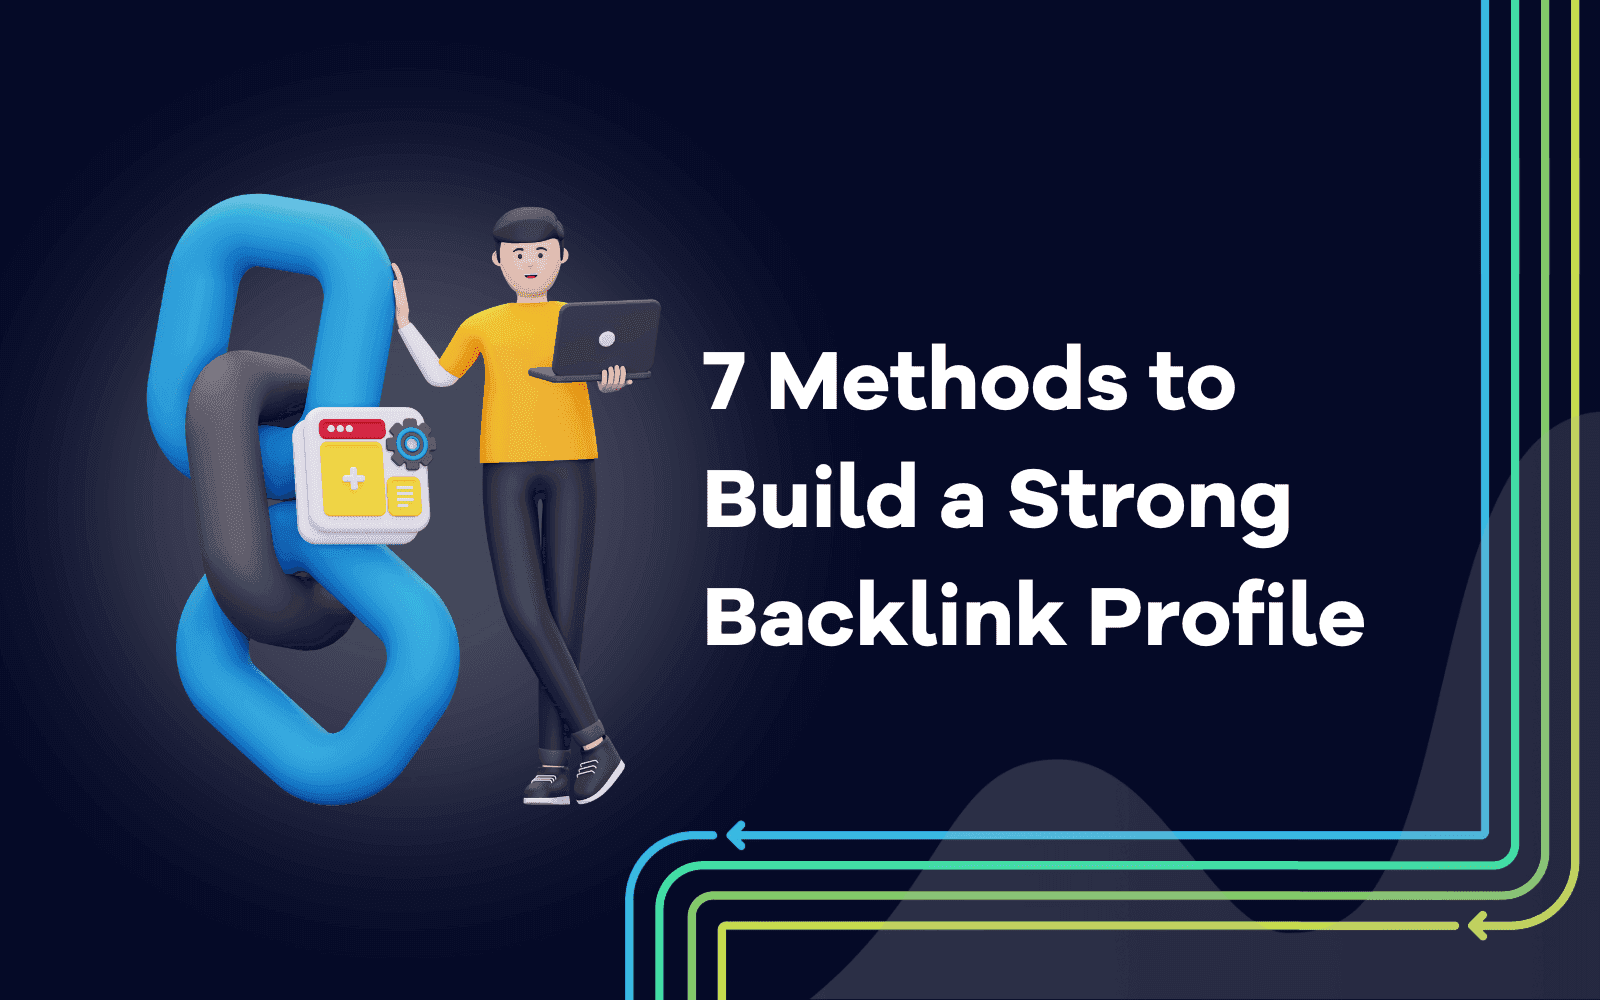 Methods to Build a Strong Backlink Profile